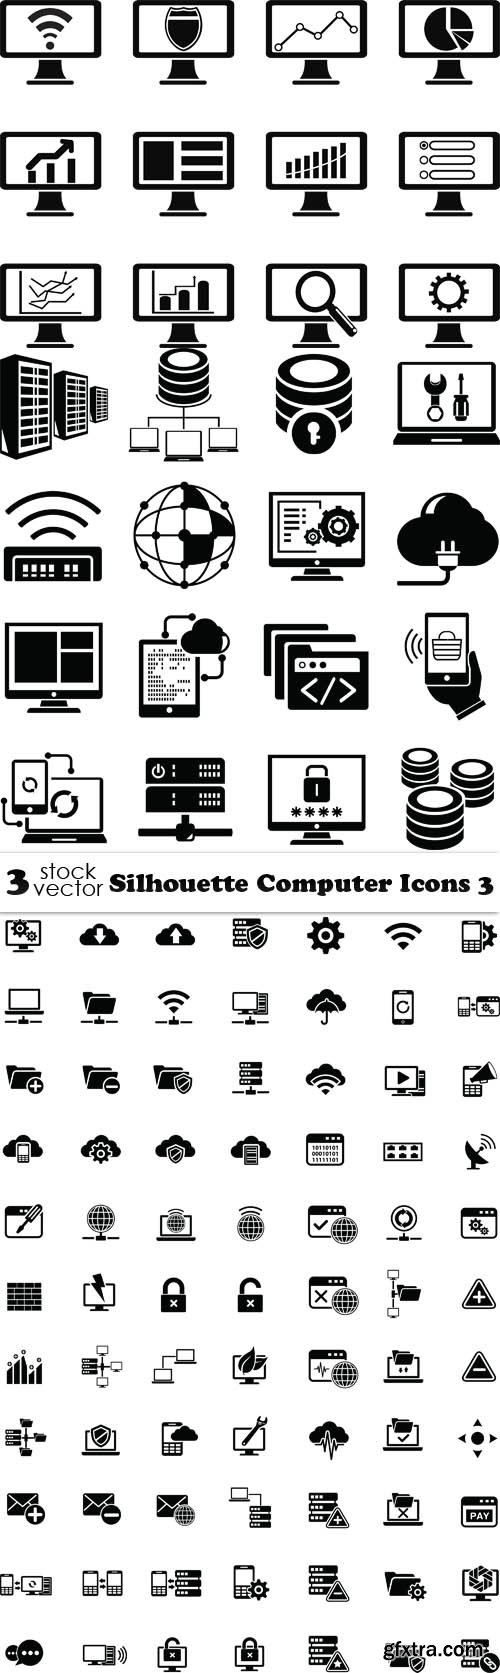 Vectors - Silhouette Computer Icons 3